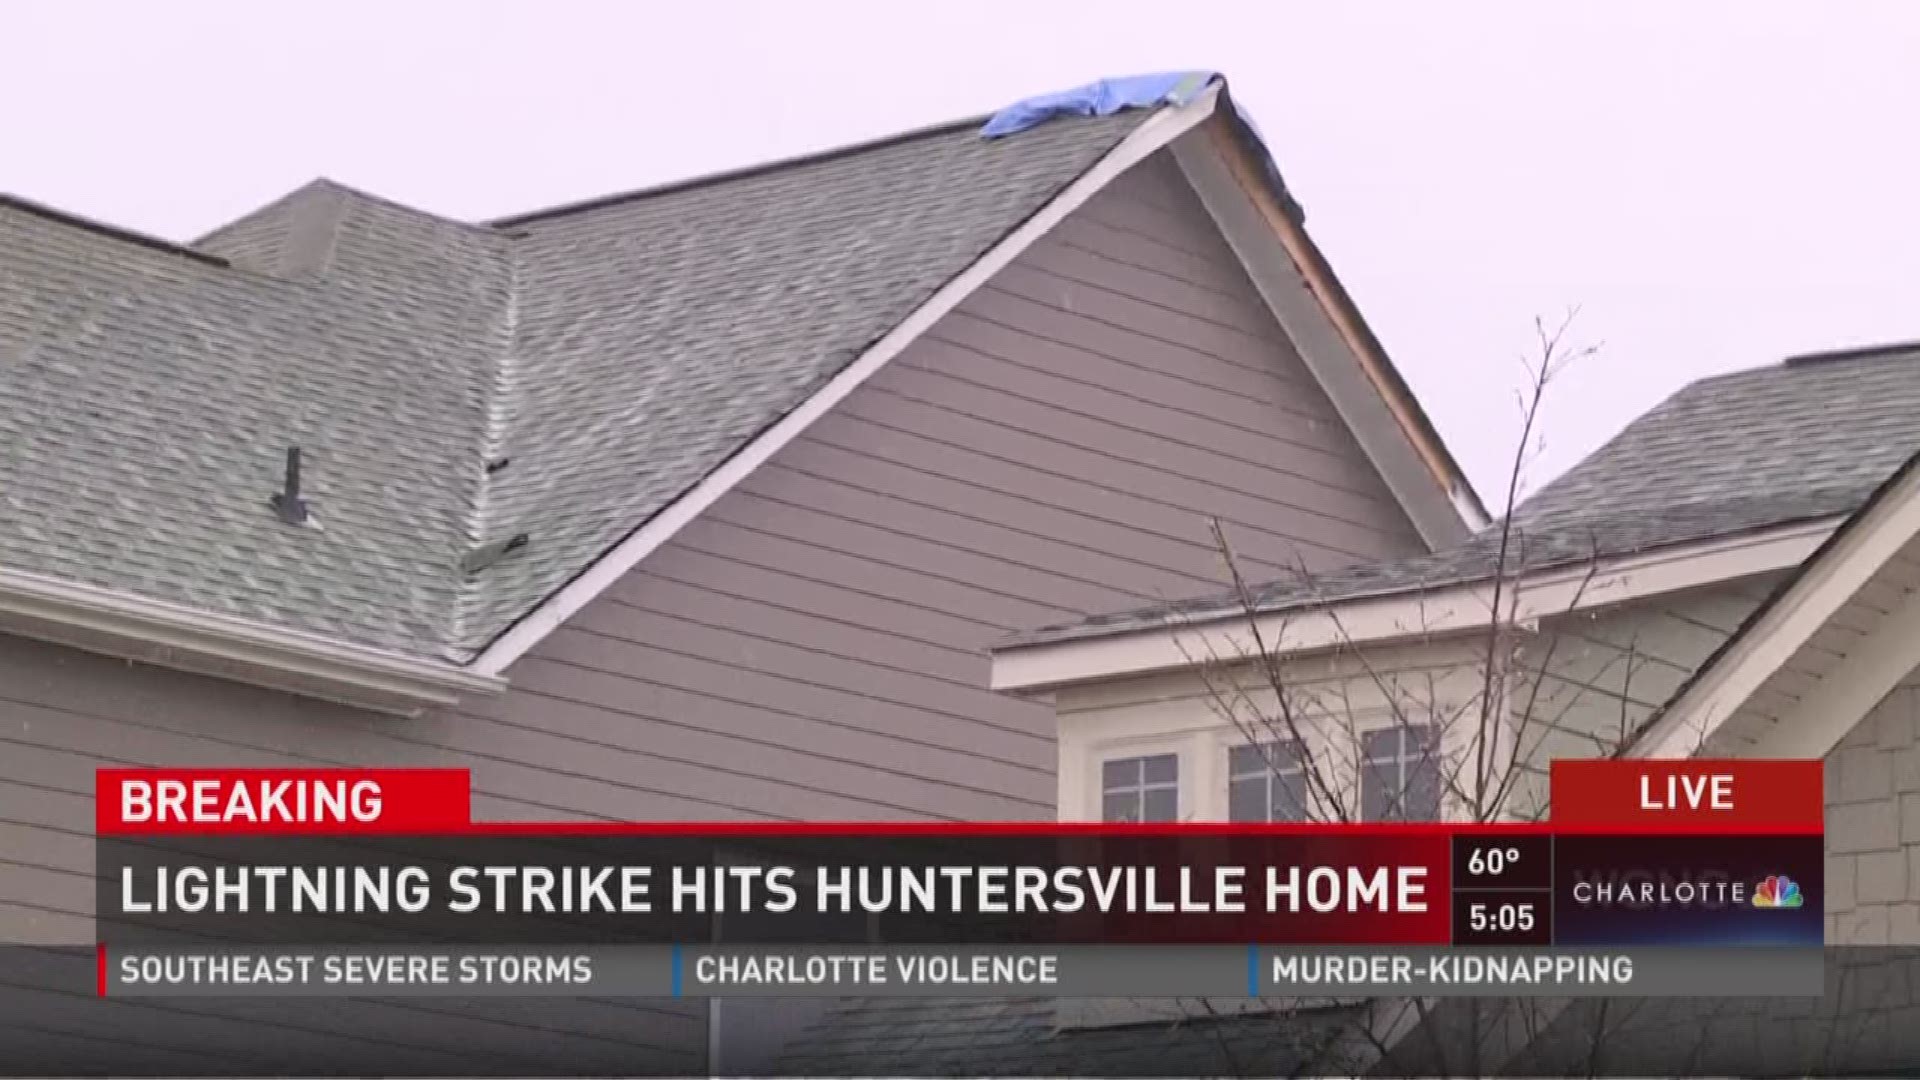 Firefighters were called to home struck by lightning in Huntersville Wednesday afternoon.